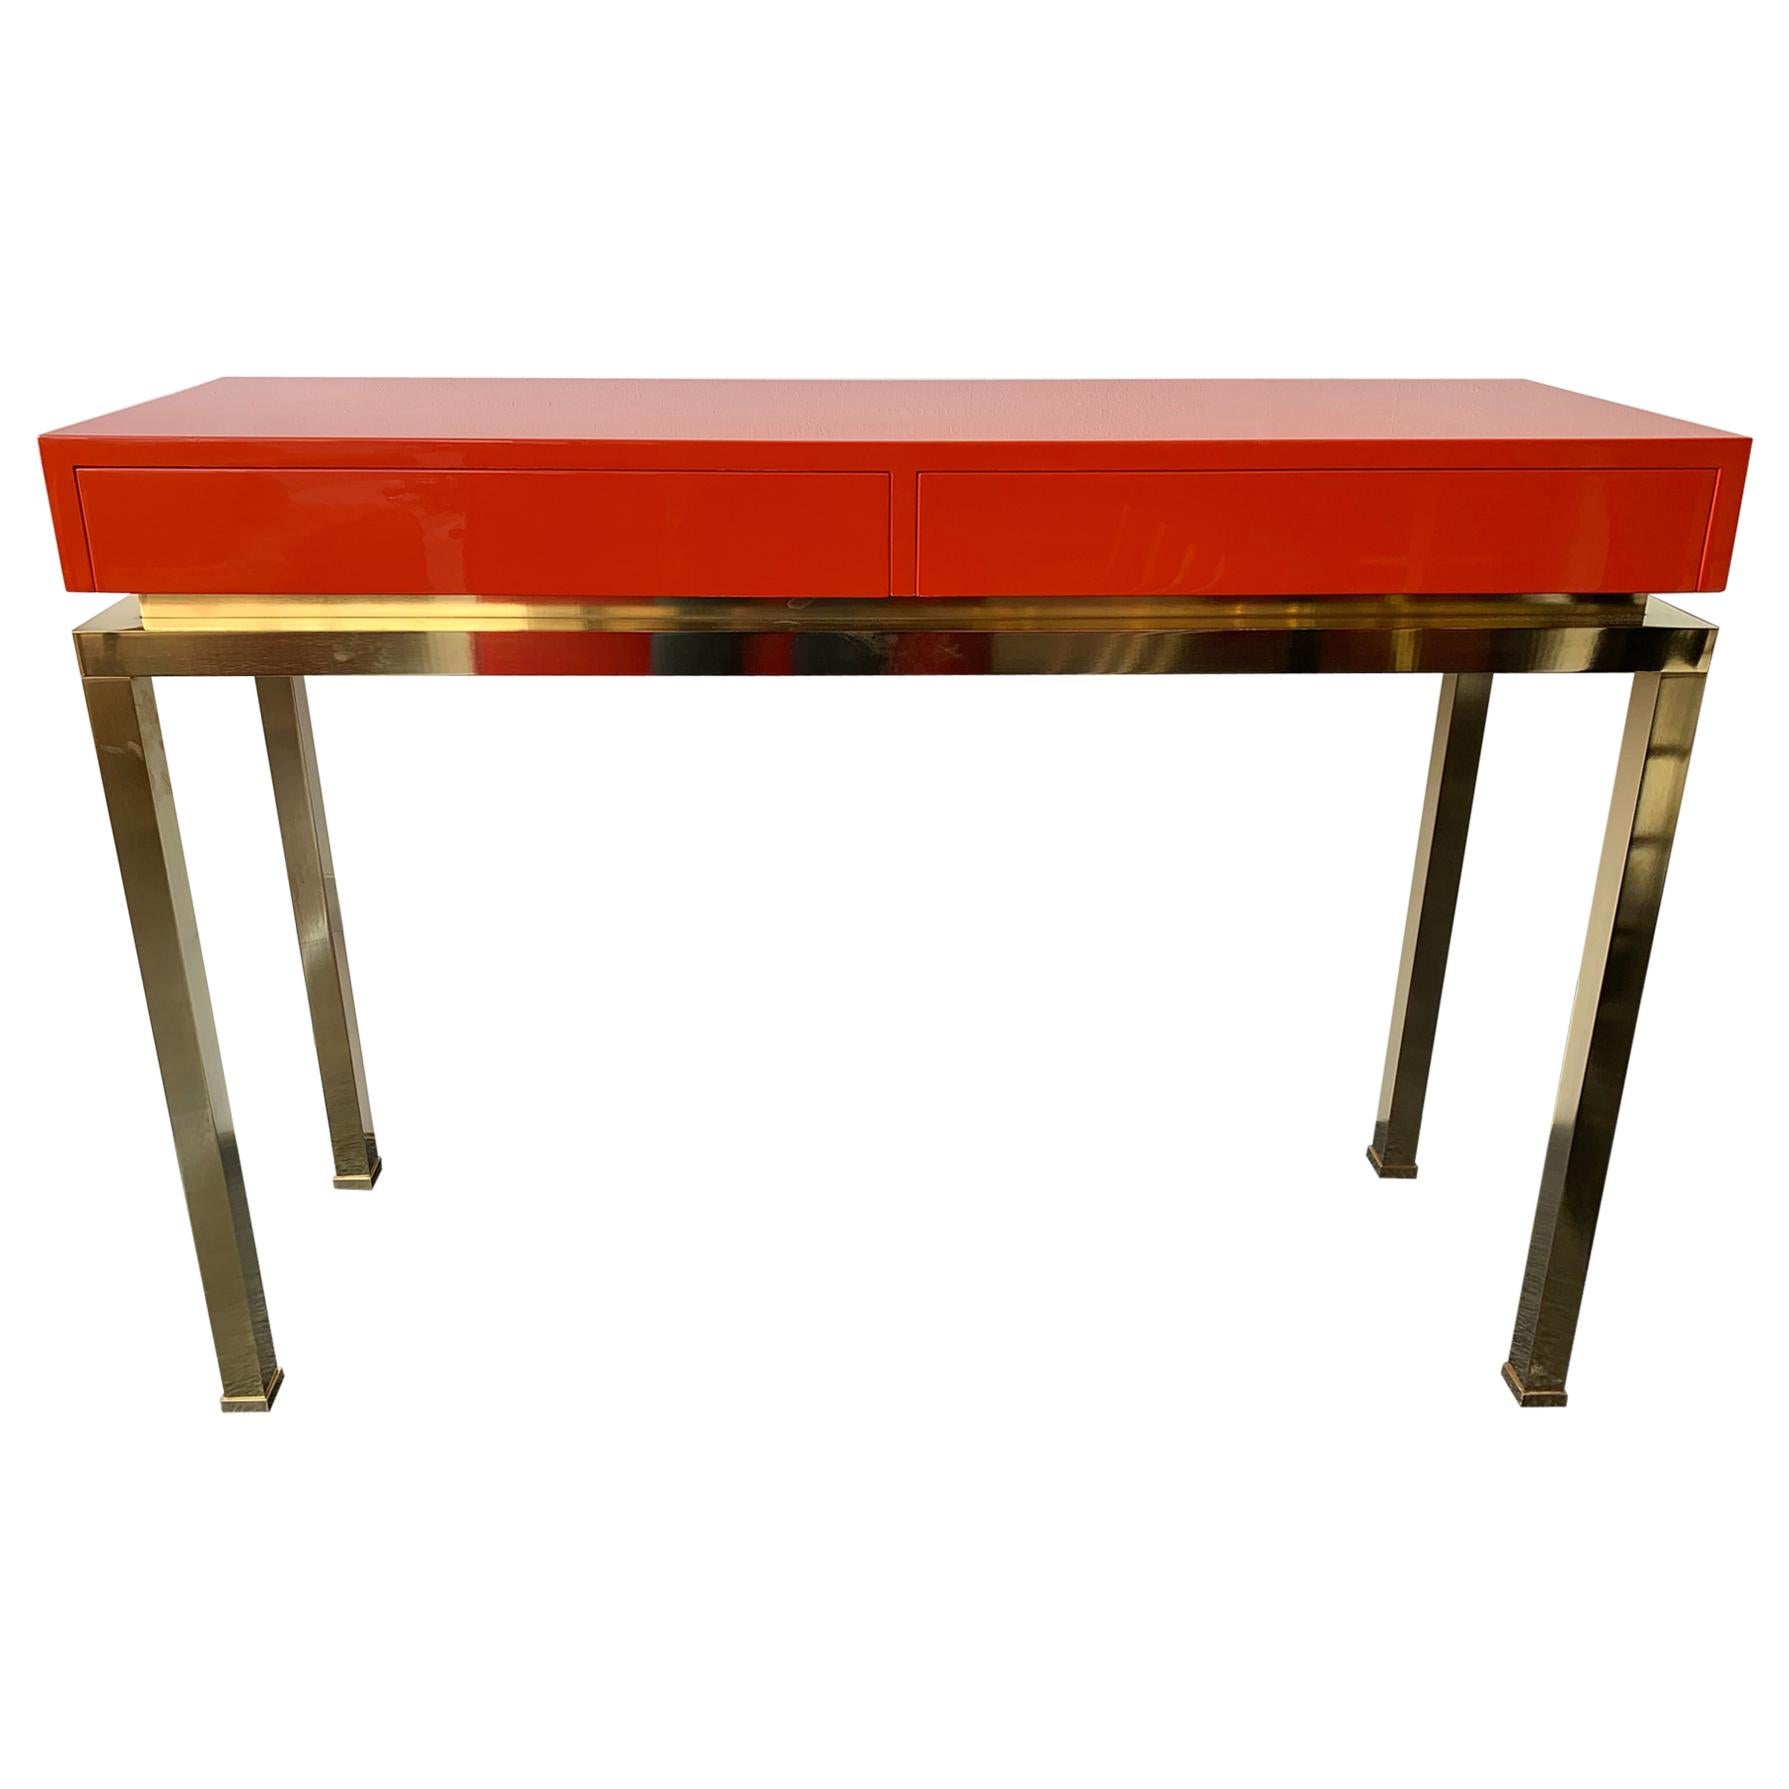 Lacquered and Brass Console by Guy Lefevre, France, 1970s